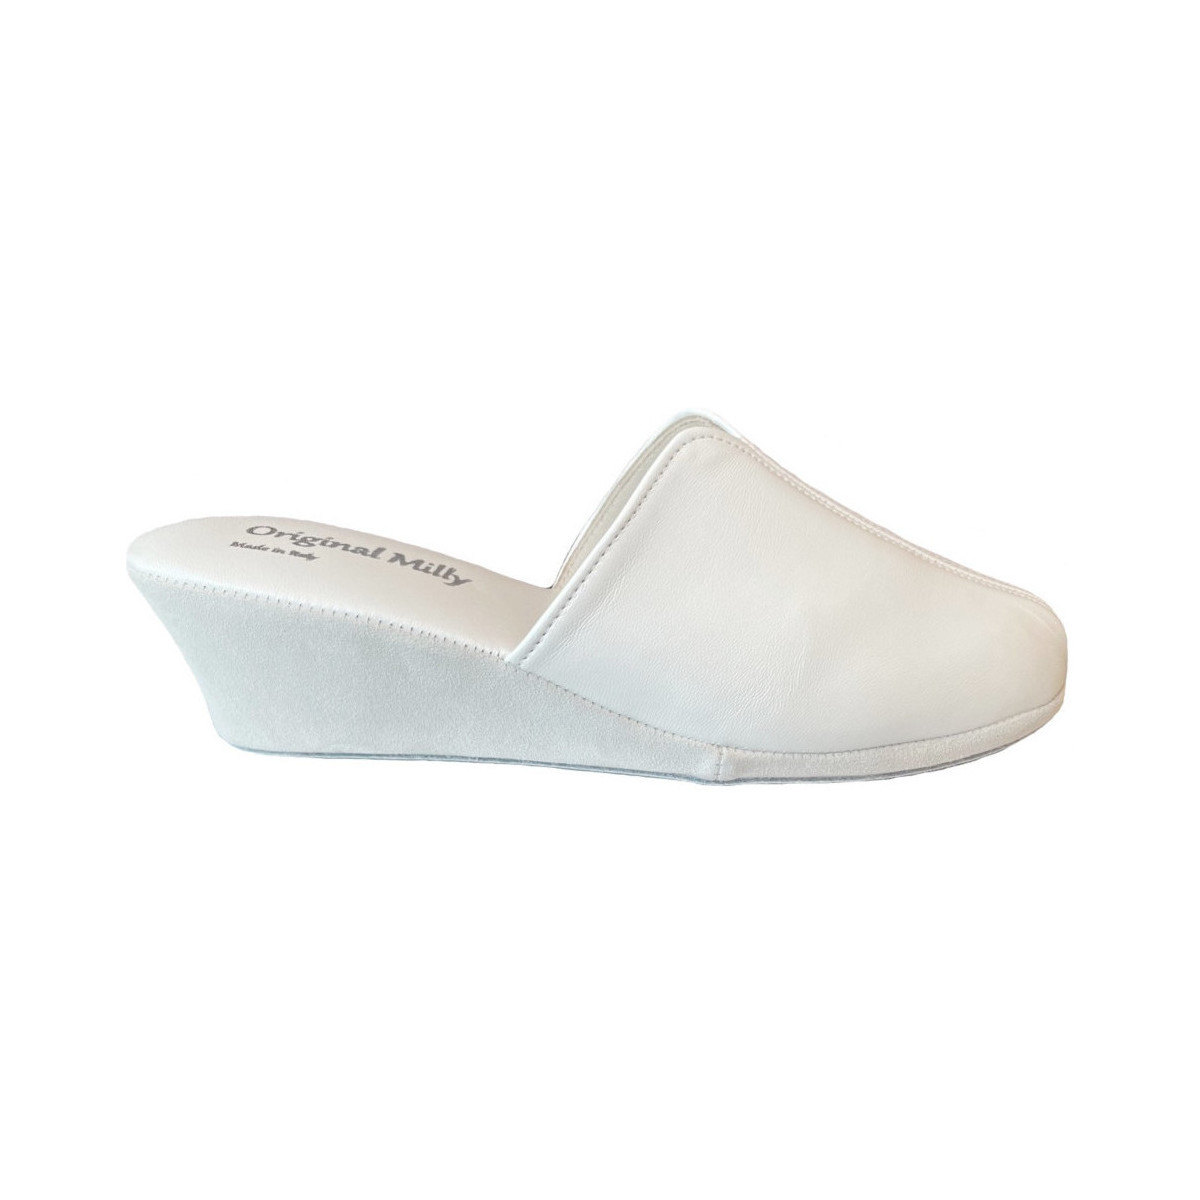 Chaussures Femme Mules Milly MILLY1000bia Blanc